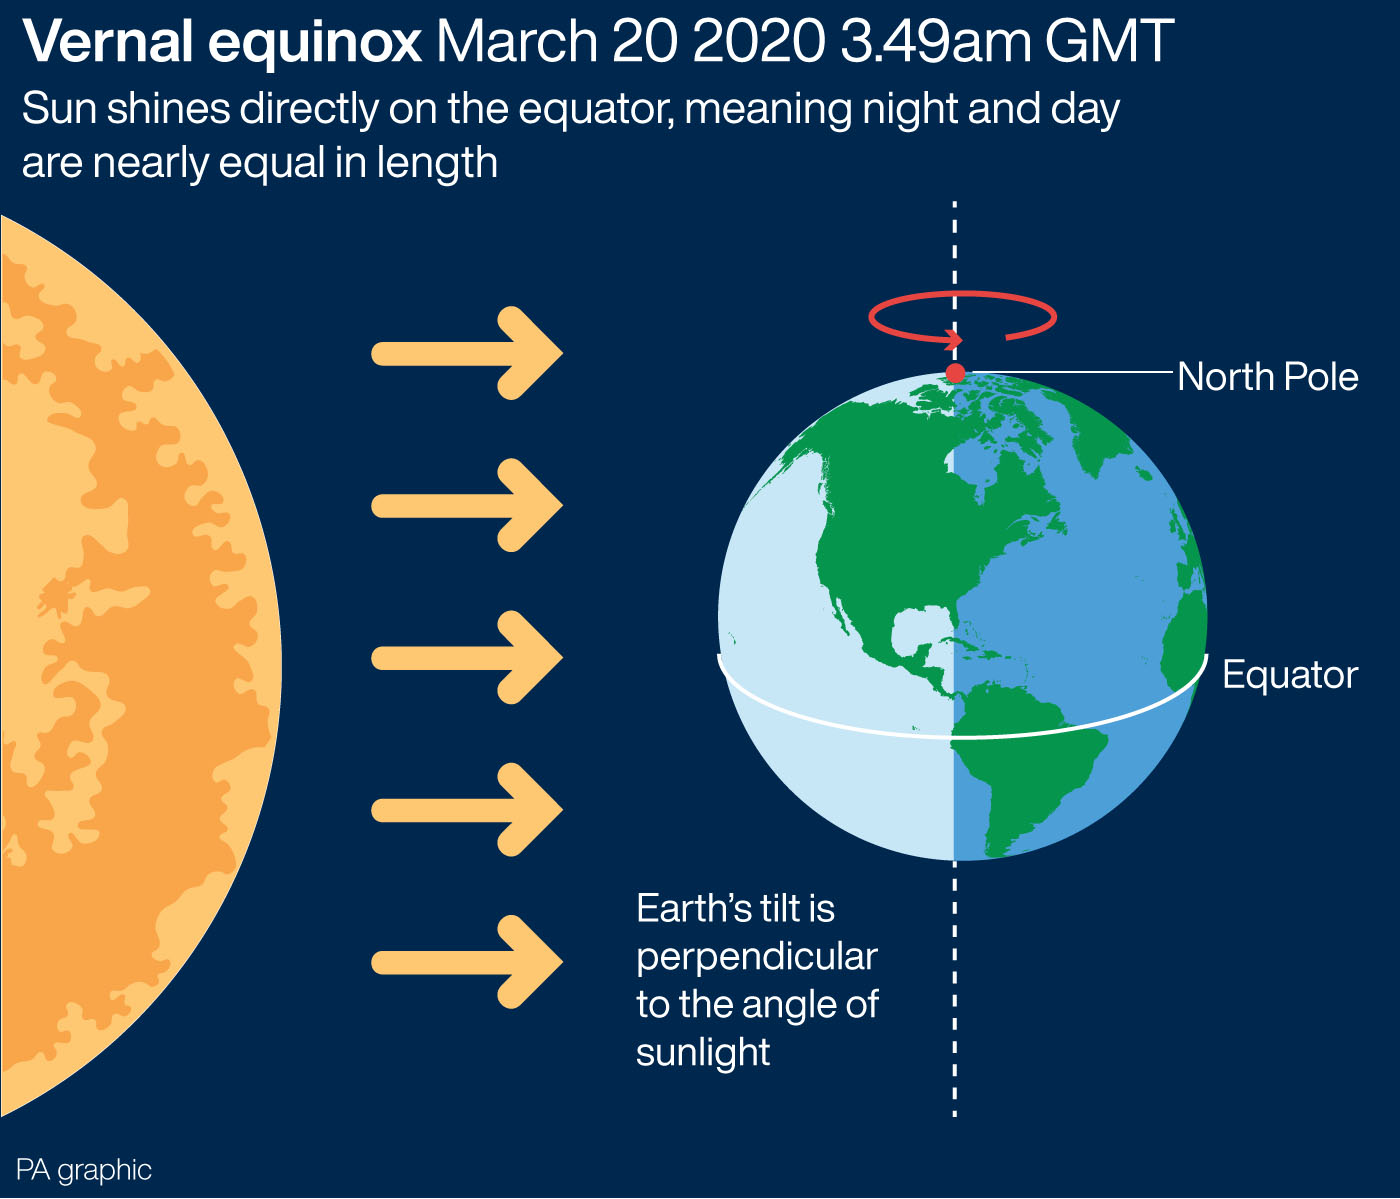 A graphic showing the spring equinox